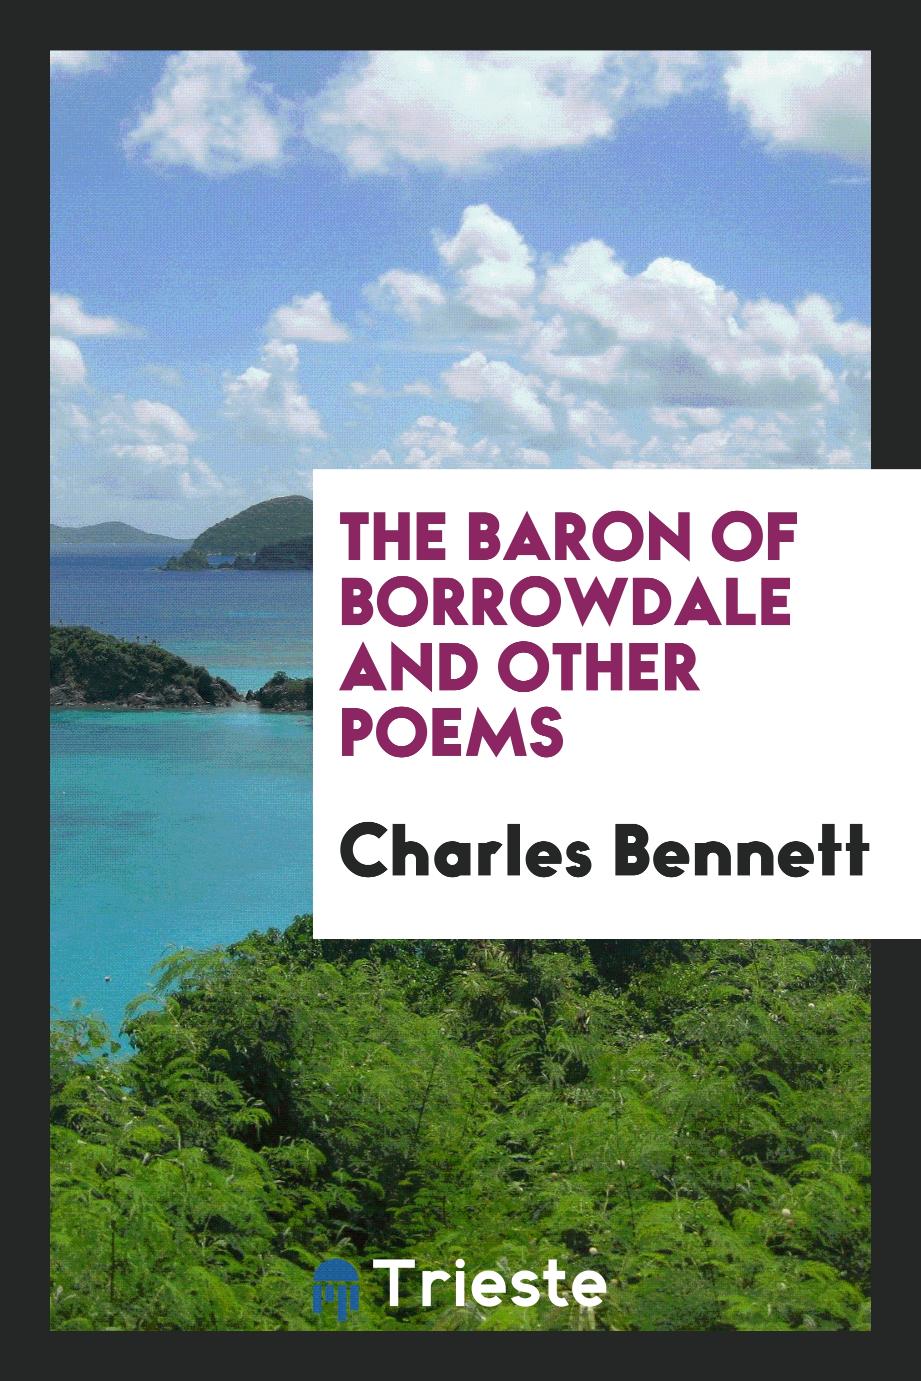 The Baron of Borrowdale and Other Poems